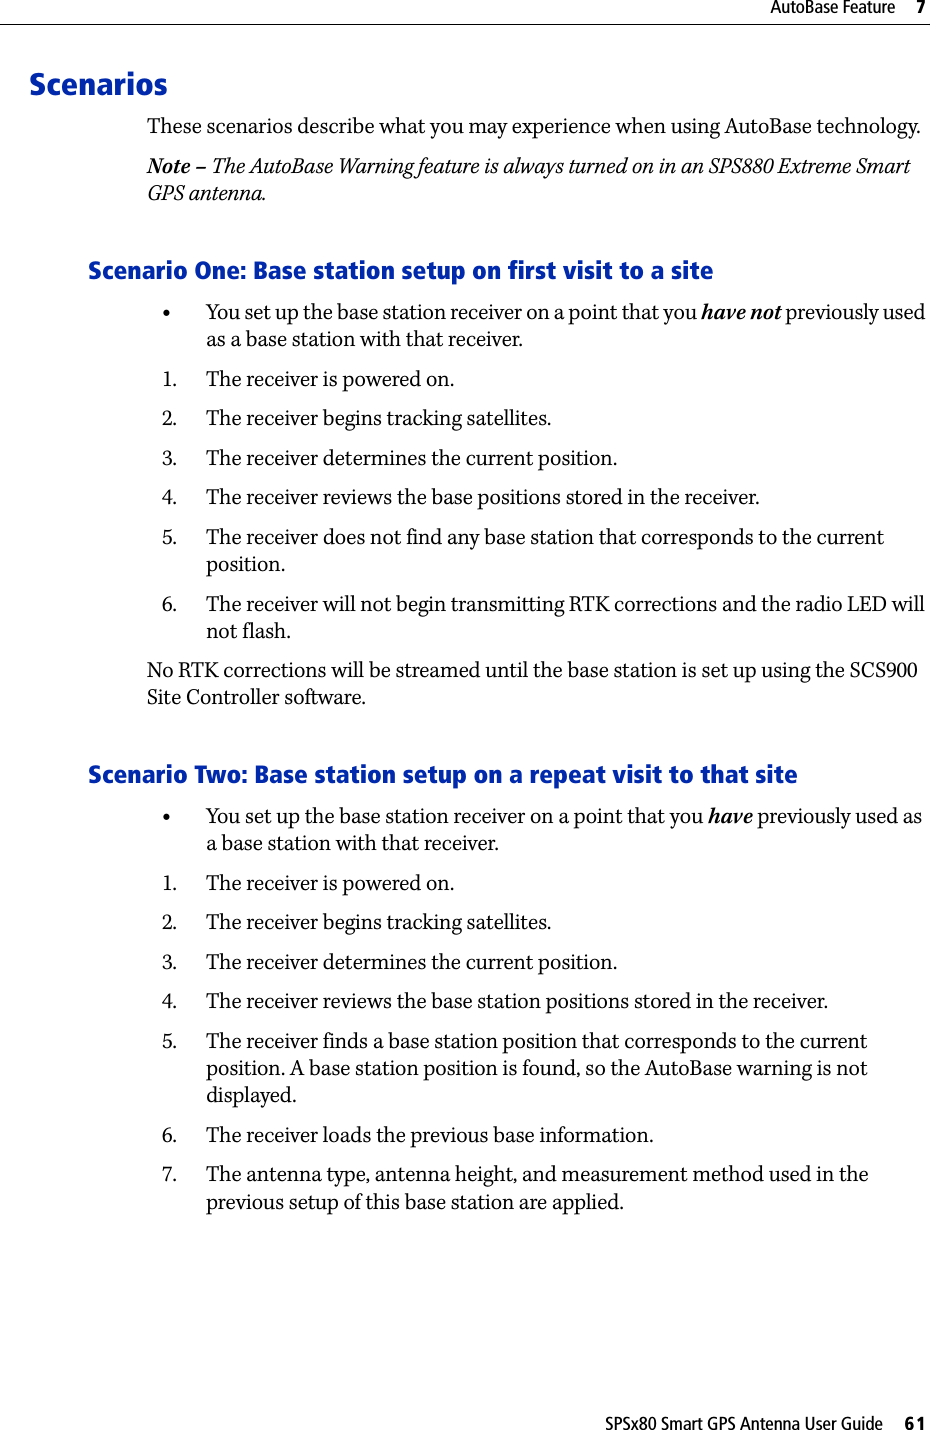 SPSx80 Smart GPS Antenna User Guide     61AutoBase Feature     7ScenariosThese scenarios describe what you may experience when using AutoBase technology.Note – The AutoBase Warning feature is always turned on in an SPS880 Extreme Smart GPS antenna.Scenario One: Base station setup on first visit to a site•You set up the base station receiver on a point that you have not previously used as a base station with that receiver.1. The receiver is powered on.2. The receiver begins tracking satellites.3. The receiver determines the current position.4. The receiver reviews the base positions stored in the receiver.5. The receiver does not find any base station that corresponds to the current position.6. The receiver will not begin transmitting RTK corrections and the radio LED will not flash.No RTK corrections will be streamed until the base station is set up using the SCS900 Site Controller software.Scenario Two: Base station setup on a repeat visit to that site •You set up the base station receiver on a point that you have previously used as a base station with that receiver.1. The receiver is powered on.2. The receiver begins tracking satellites.3. The receiver determines the current position.4. The receiver reviews the base station positions stored in the receiver.5. The receiver finds a base station position that corresponds to the current position. A base station position is found, so the AutoBase warning is not displayed.6. The receiver loads the previous base information.7. The antenna type, antenna height, and measurement method used in the previous setup of this base station are applied.